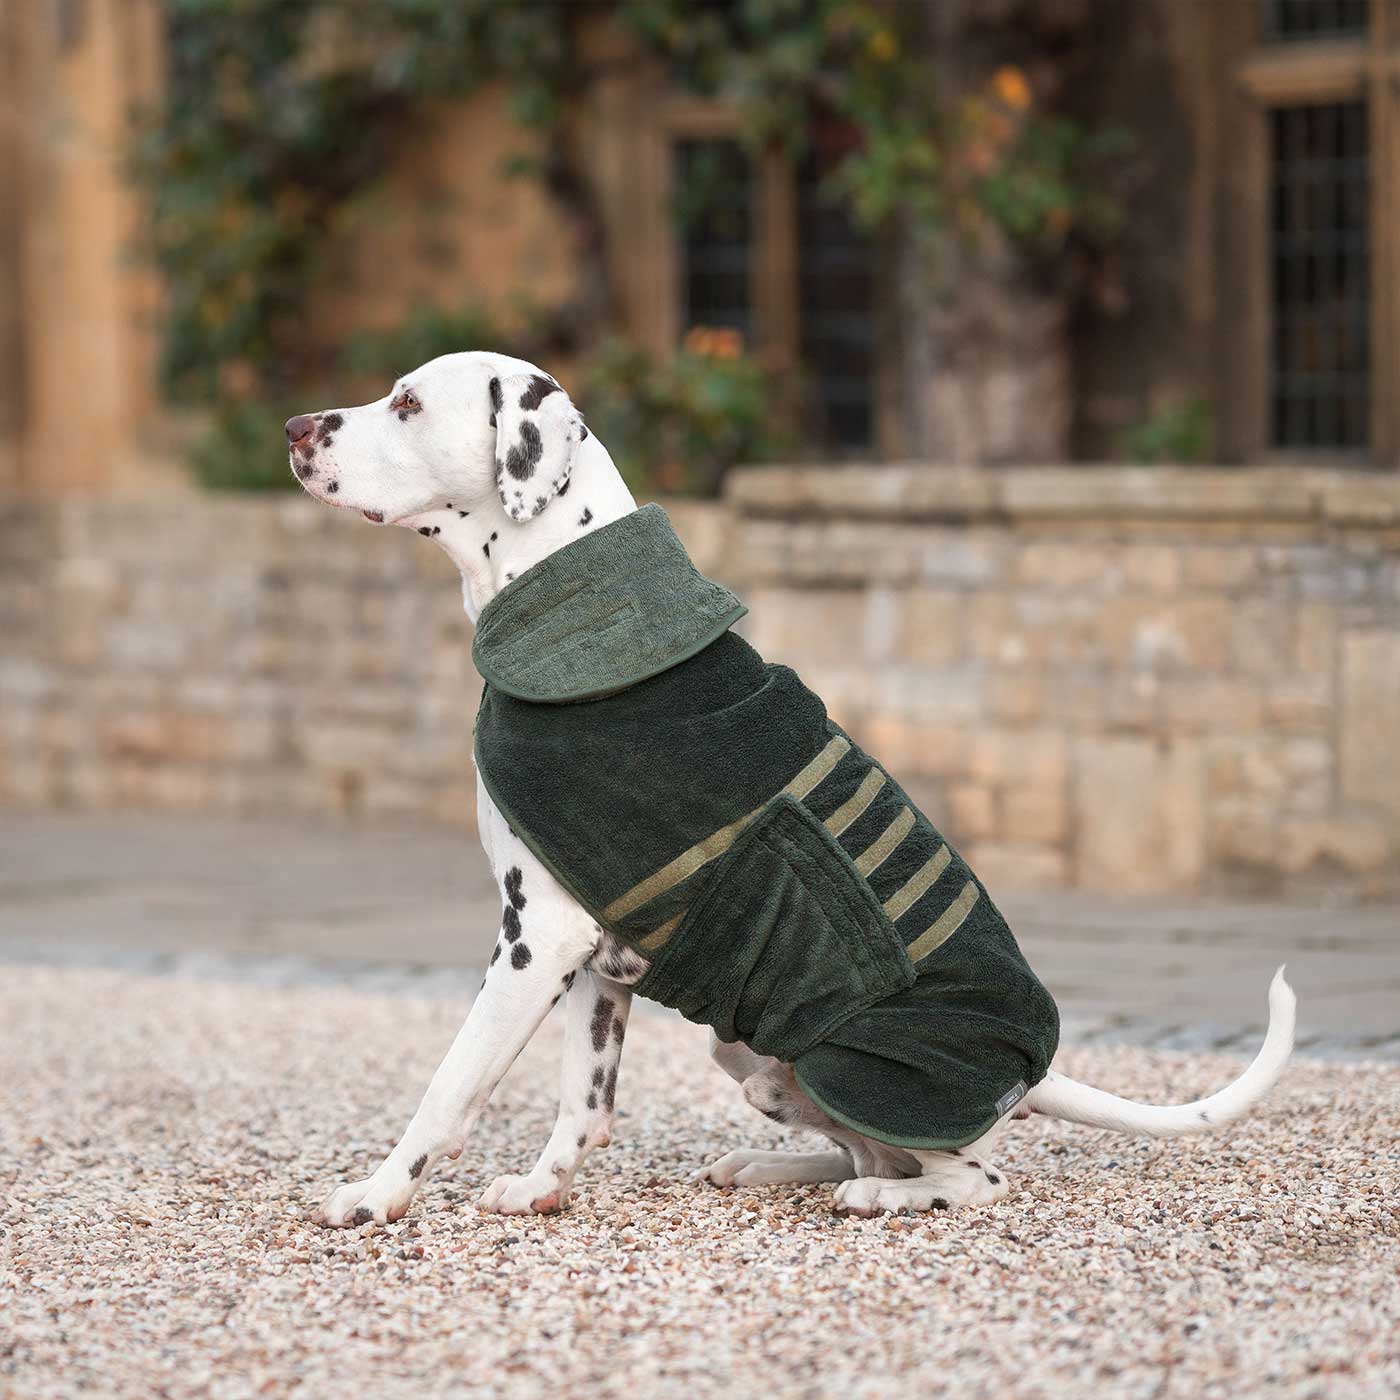 Introducing the ultimate bamboo dog drying coat in beautiful fir green, made from luxurious bamboo to aid sensitive skin featuring adjustable Velcro neck and waist fastening with super absorbent material for easy pet drying! Available now at Lords & Labradors US, In five sizes and four colors to suit all breeds!